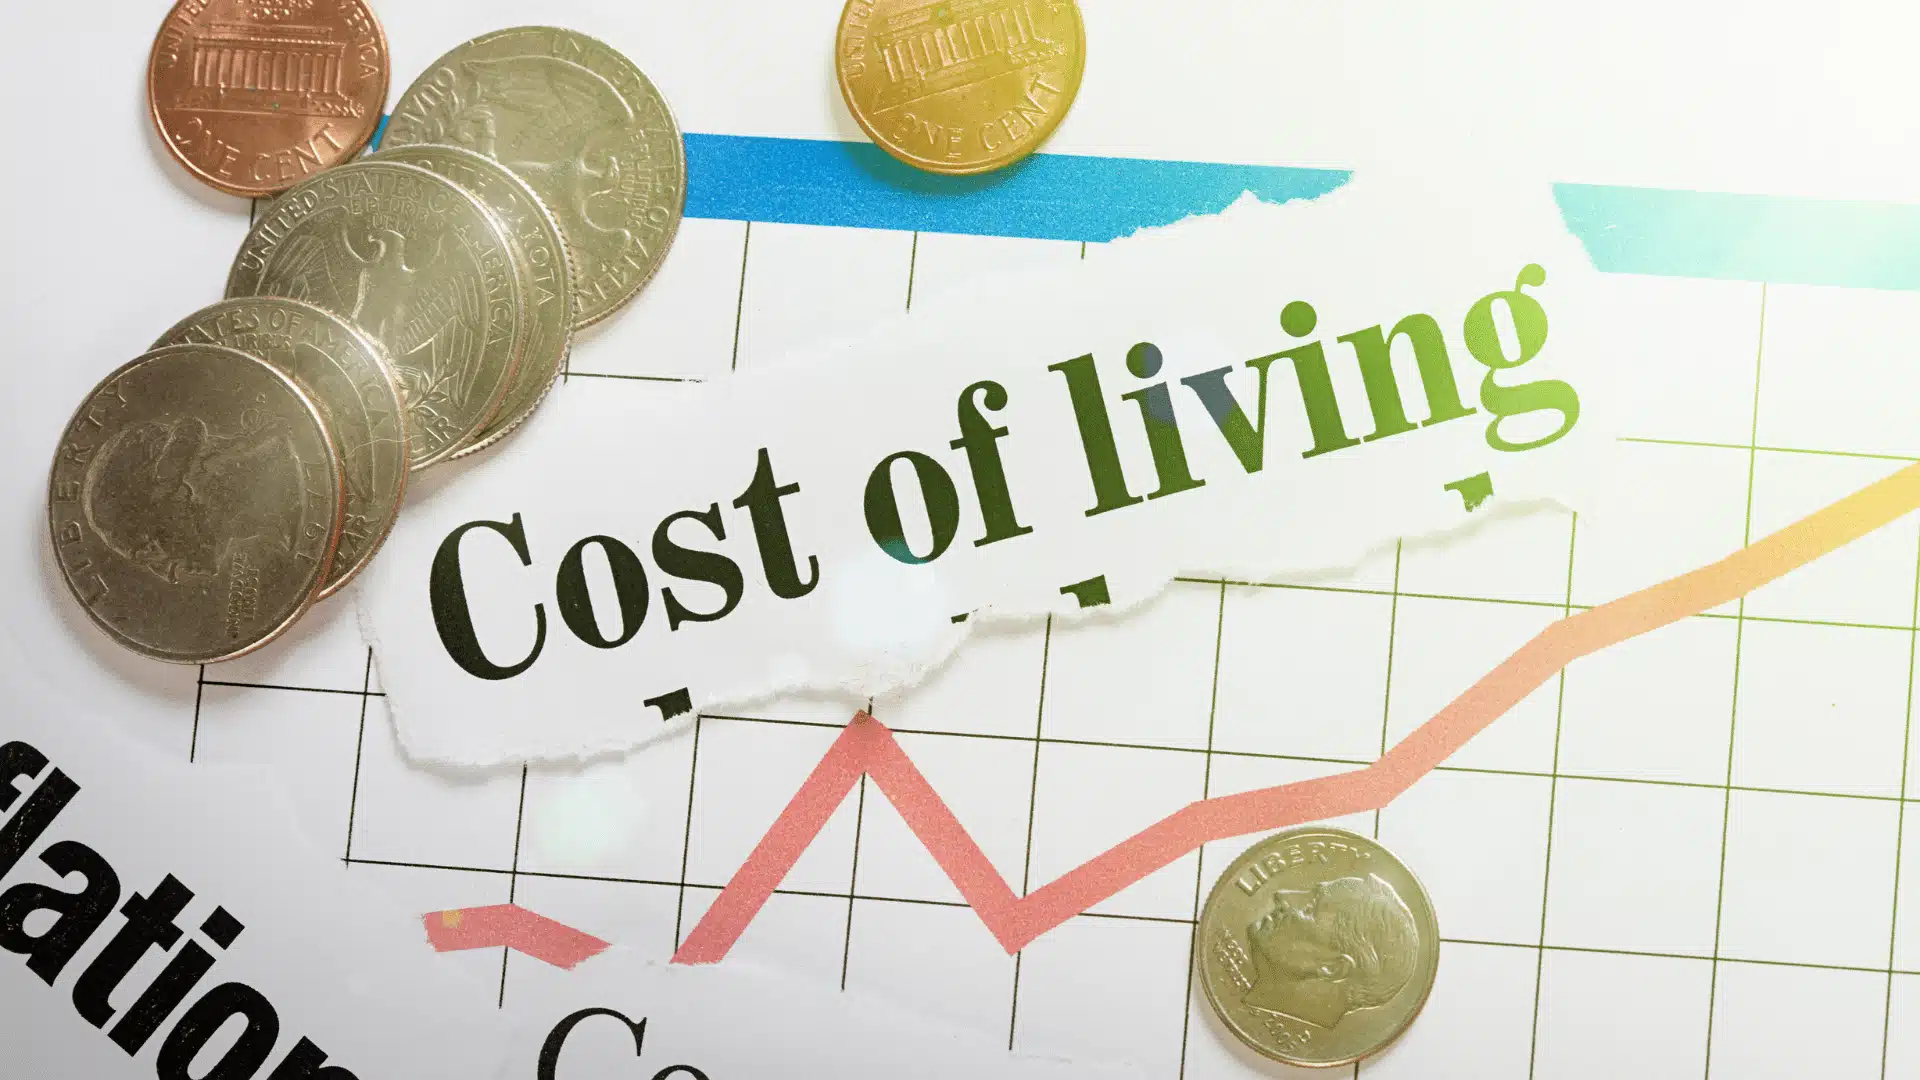 Cost of living increase for businesses